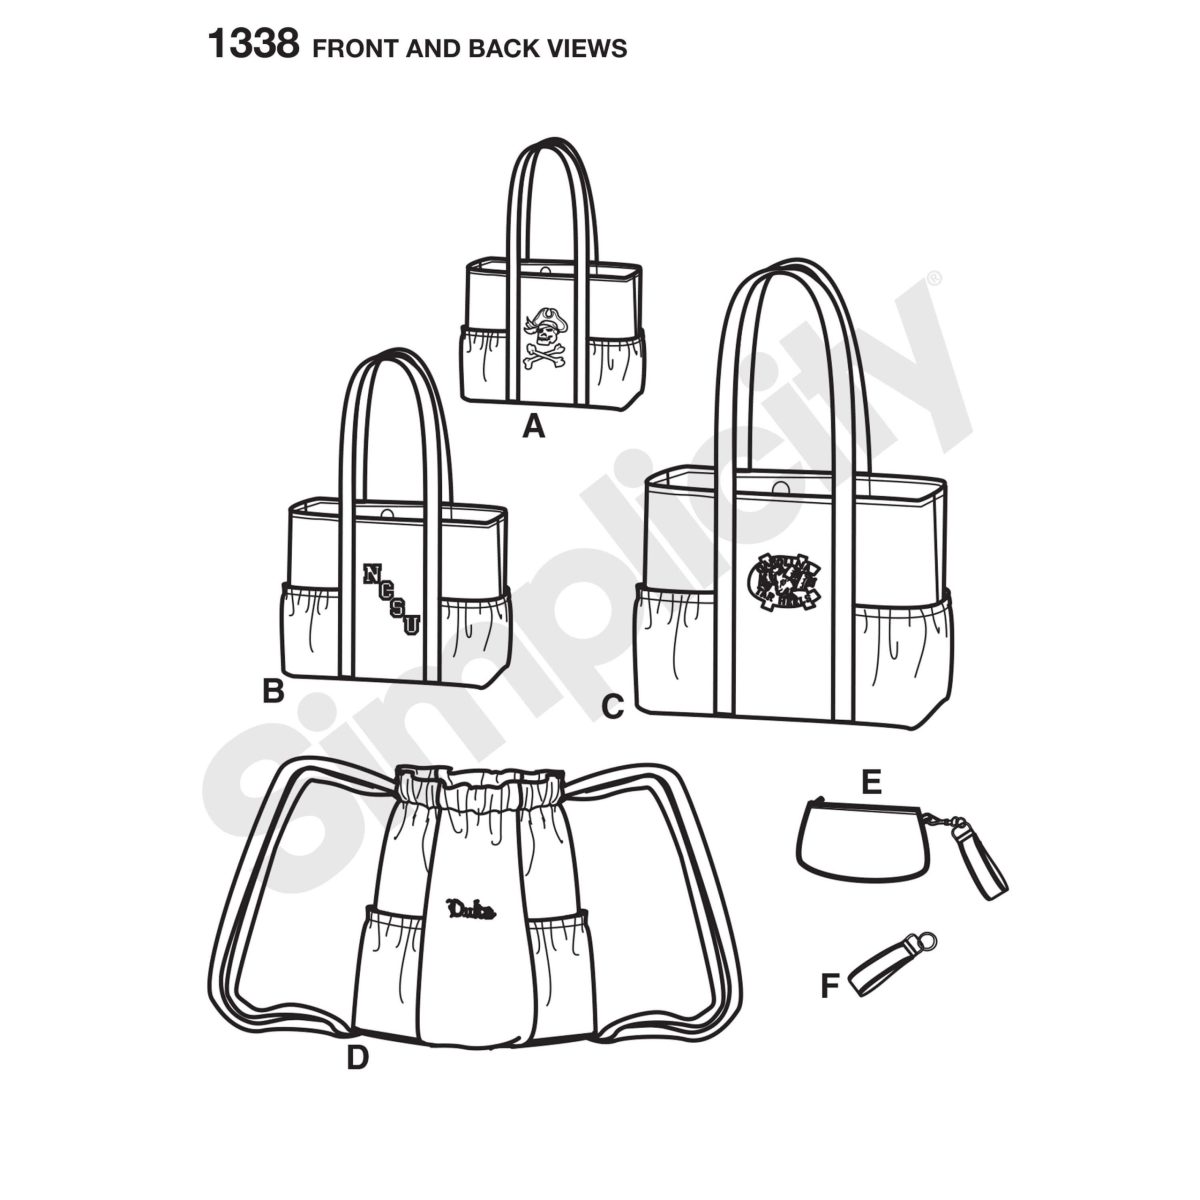 Simplicity Sewing Pattern 1338 Tote Bags in Three Sizes, Backpack and Coin Purse